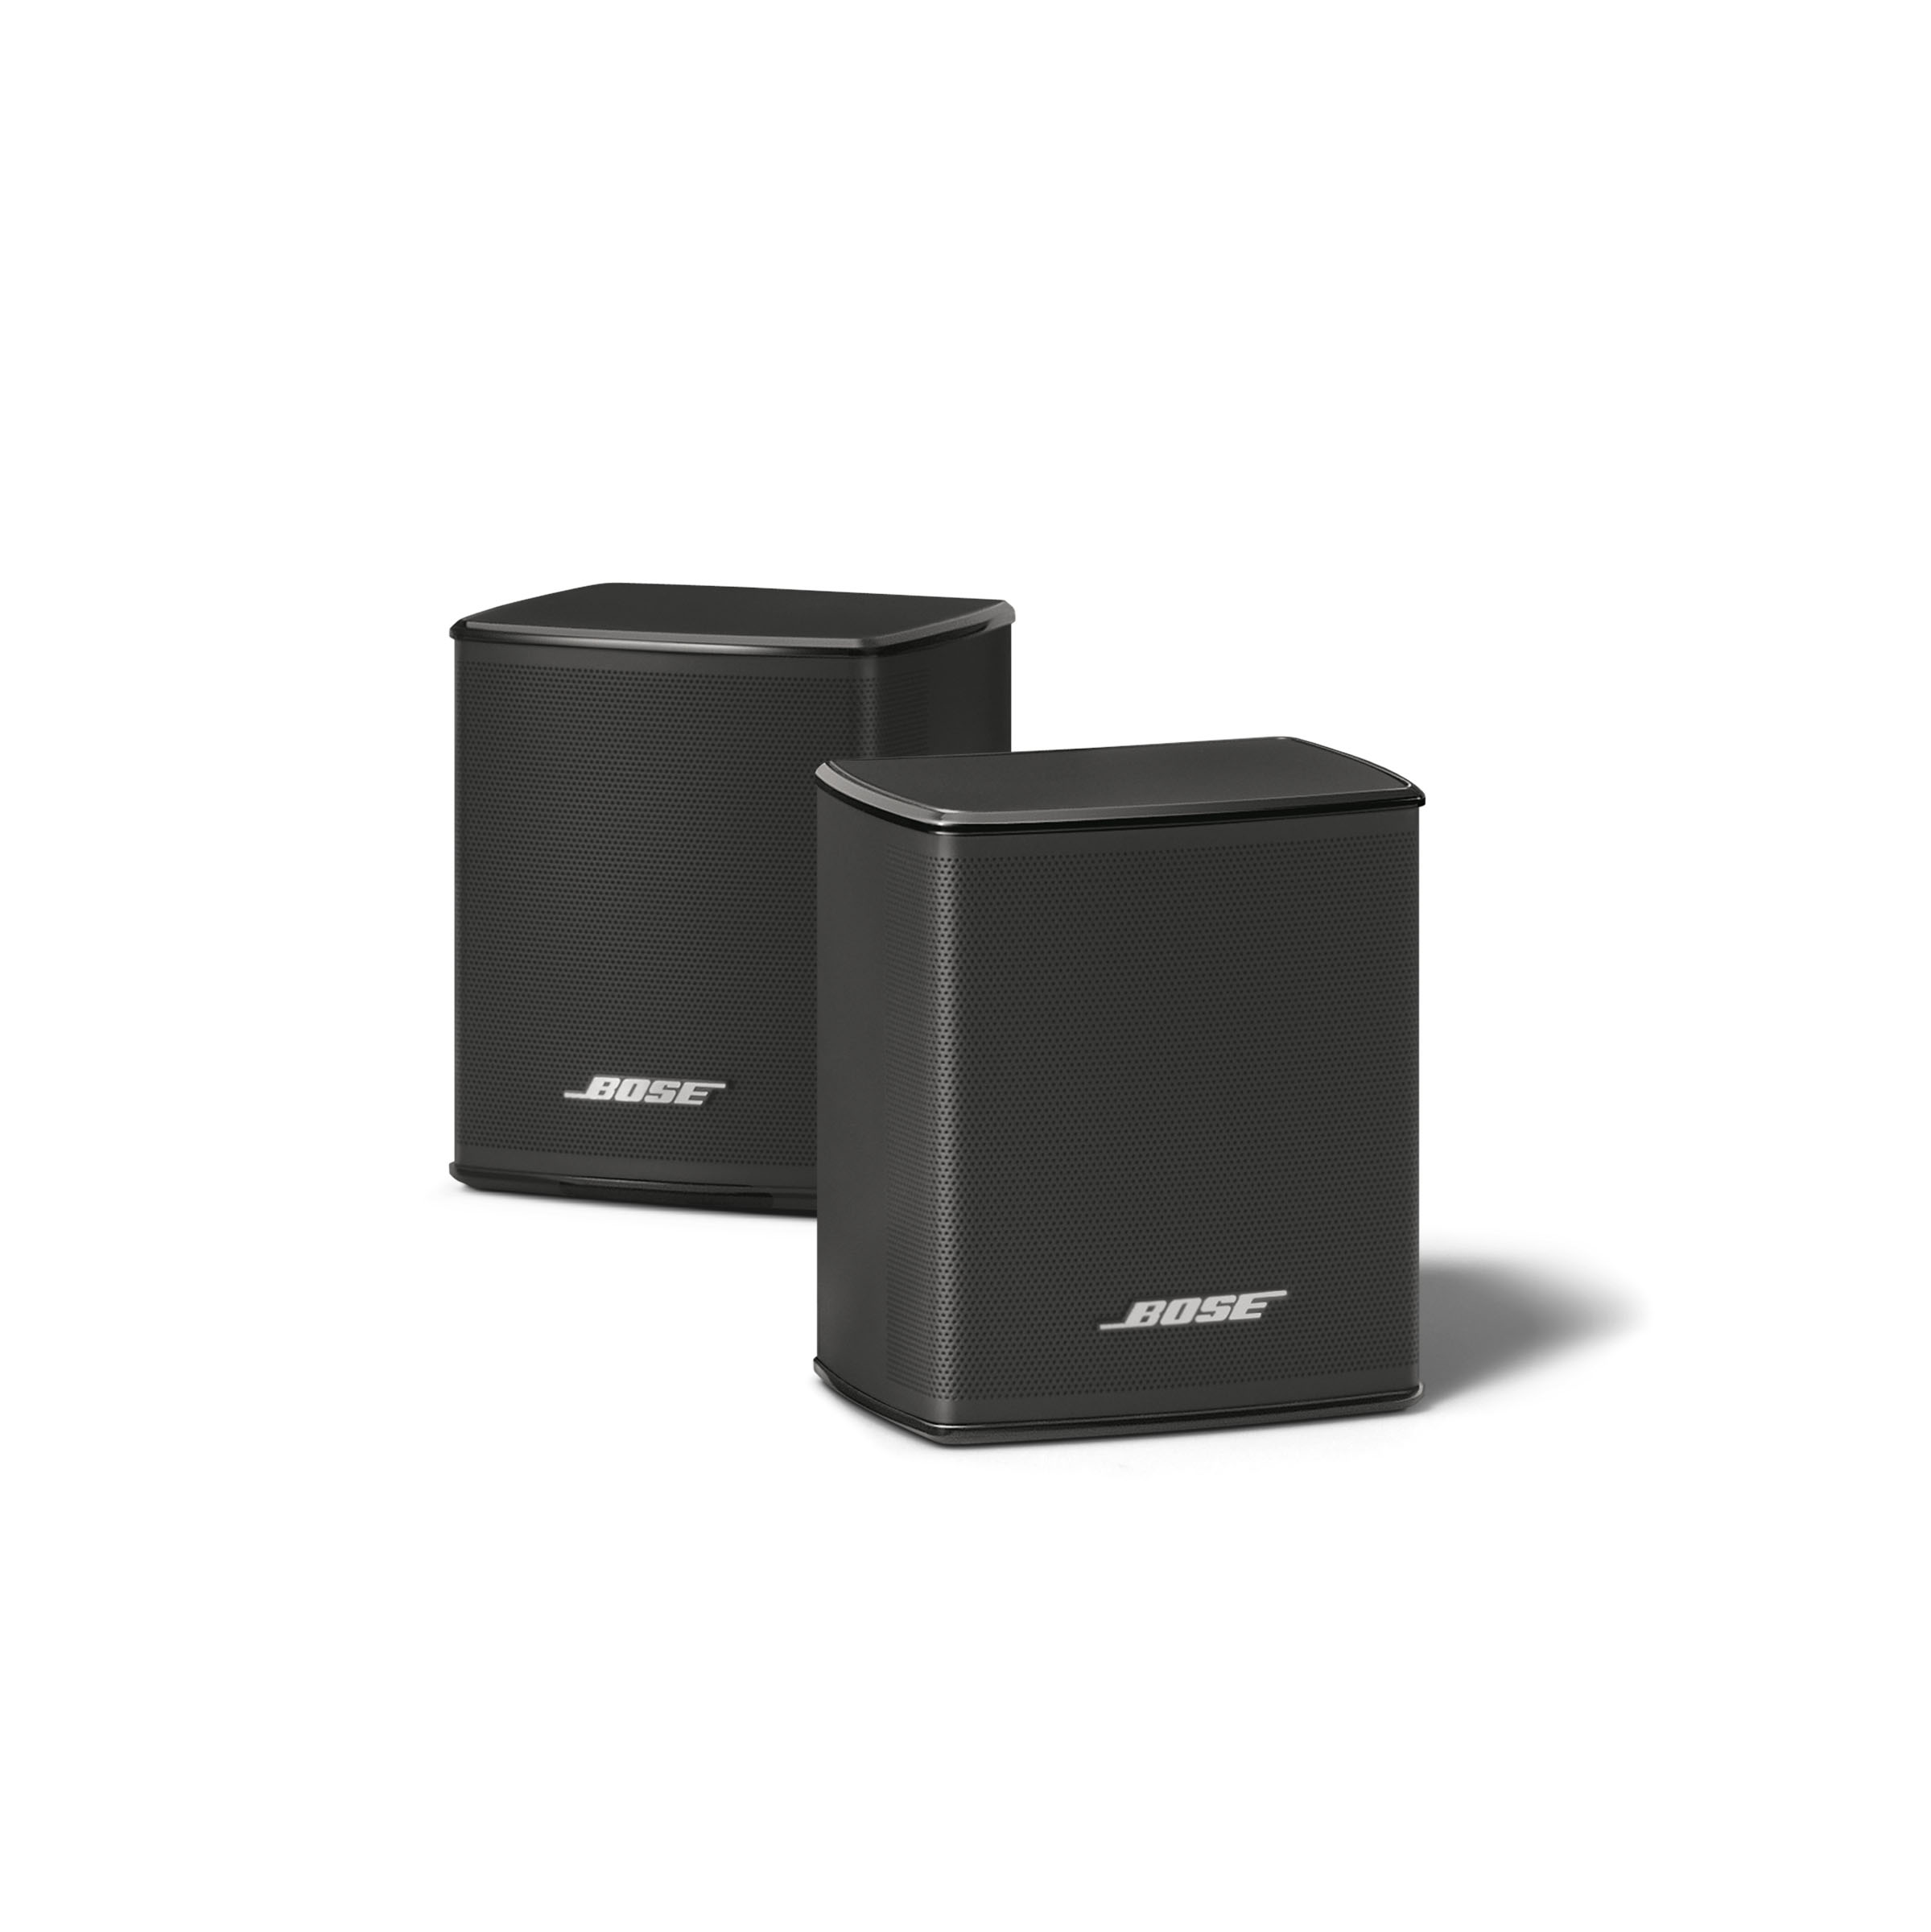 BOSE VIRTUALLY INVISIBLE 300 SPEAKERS - RiverPark